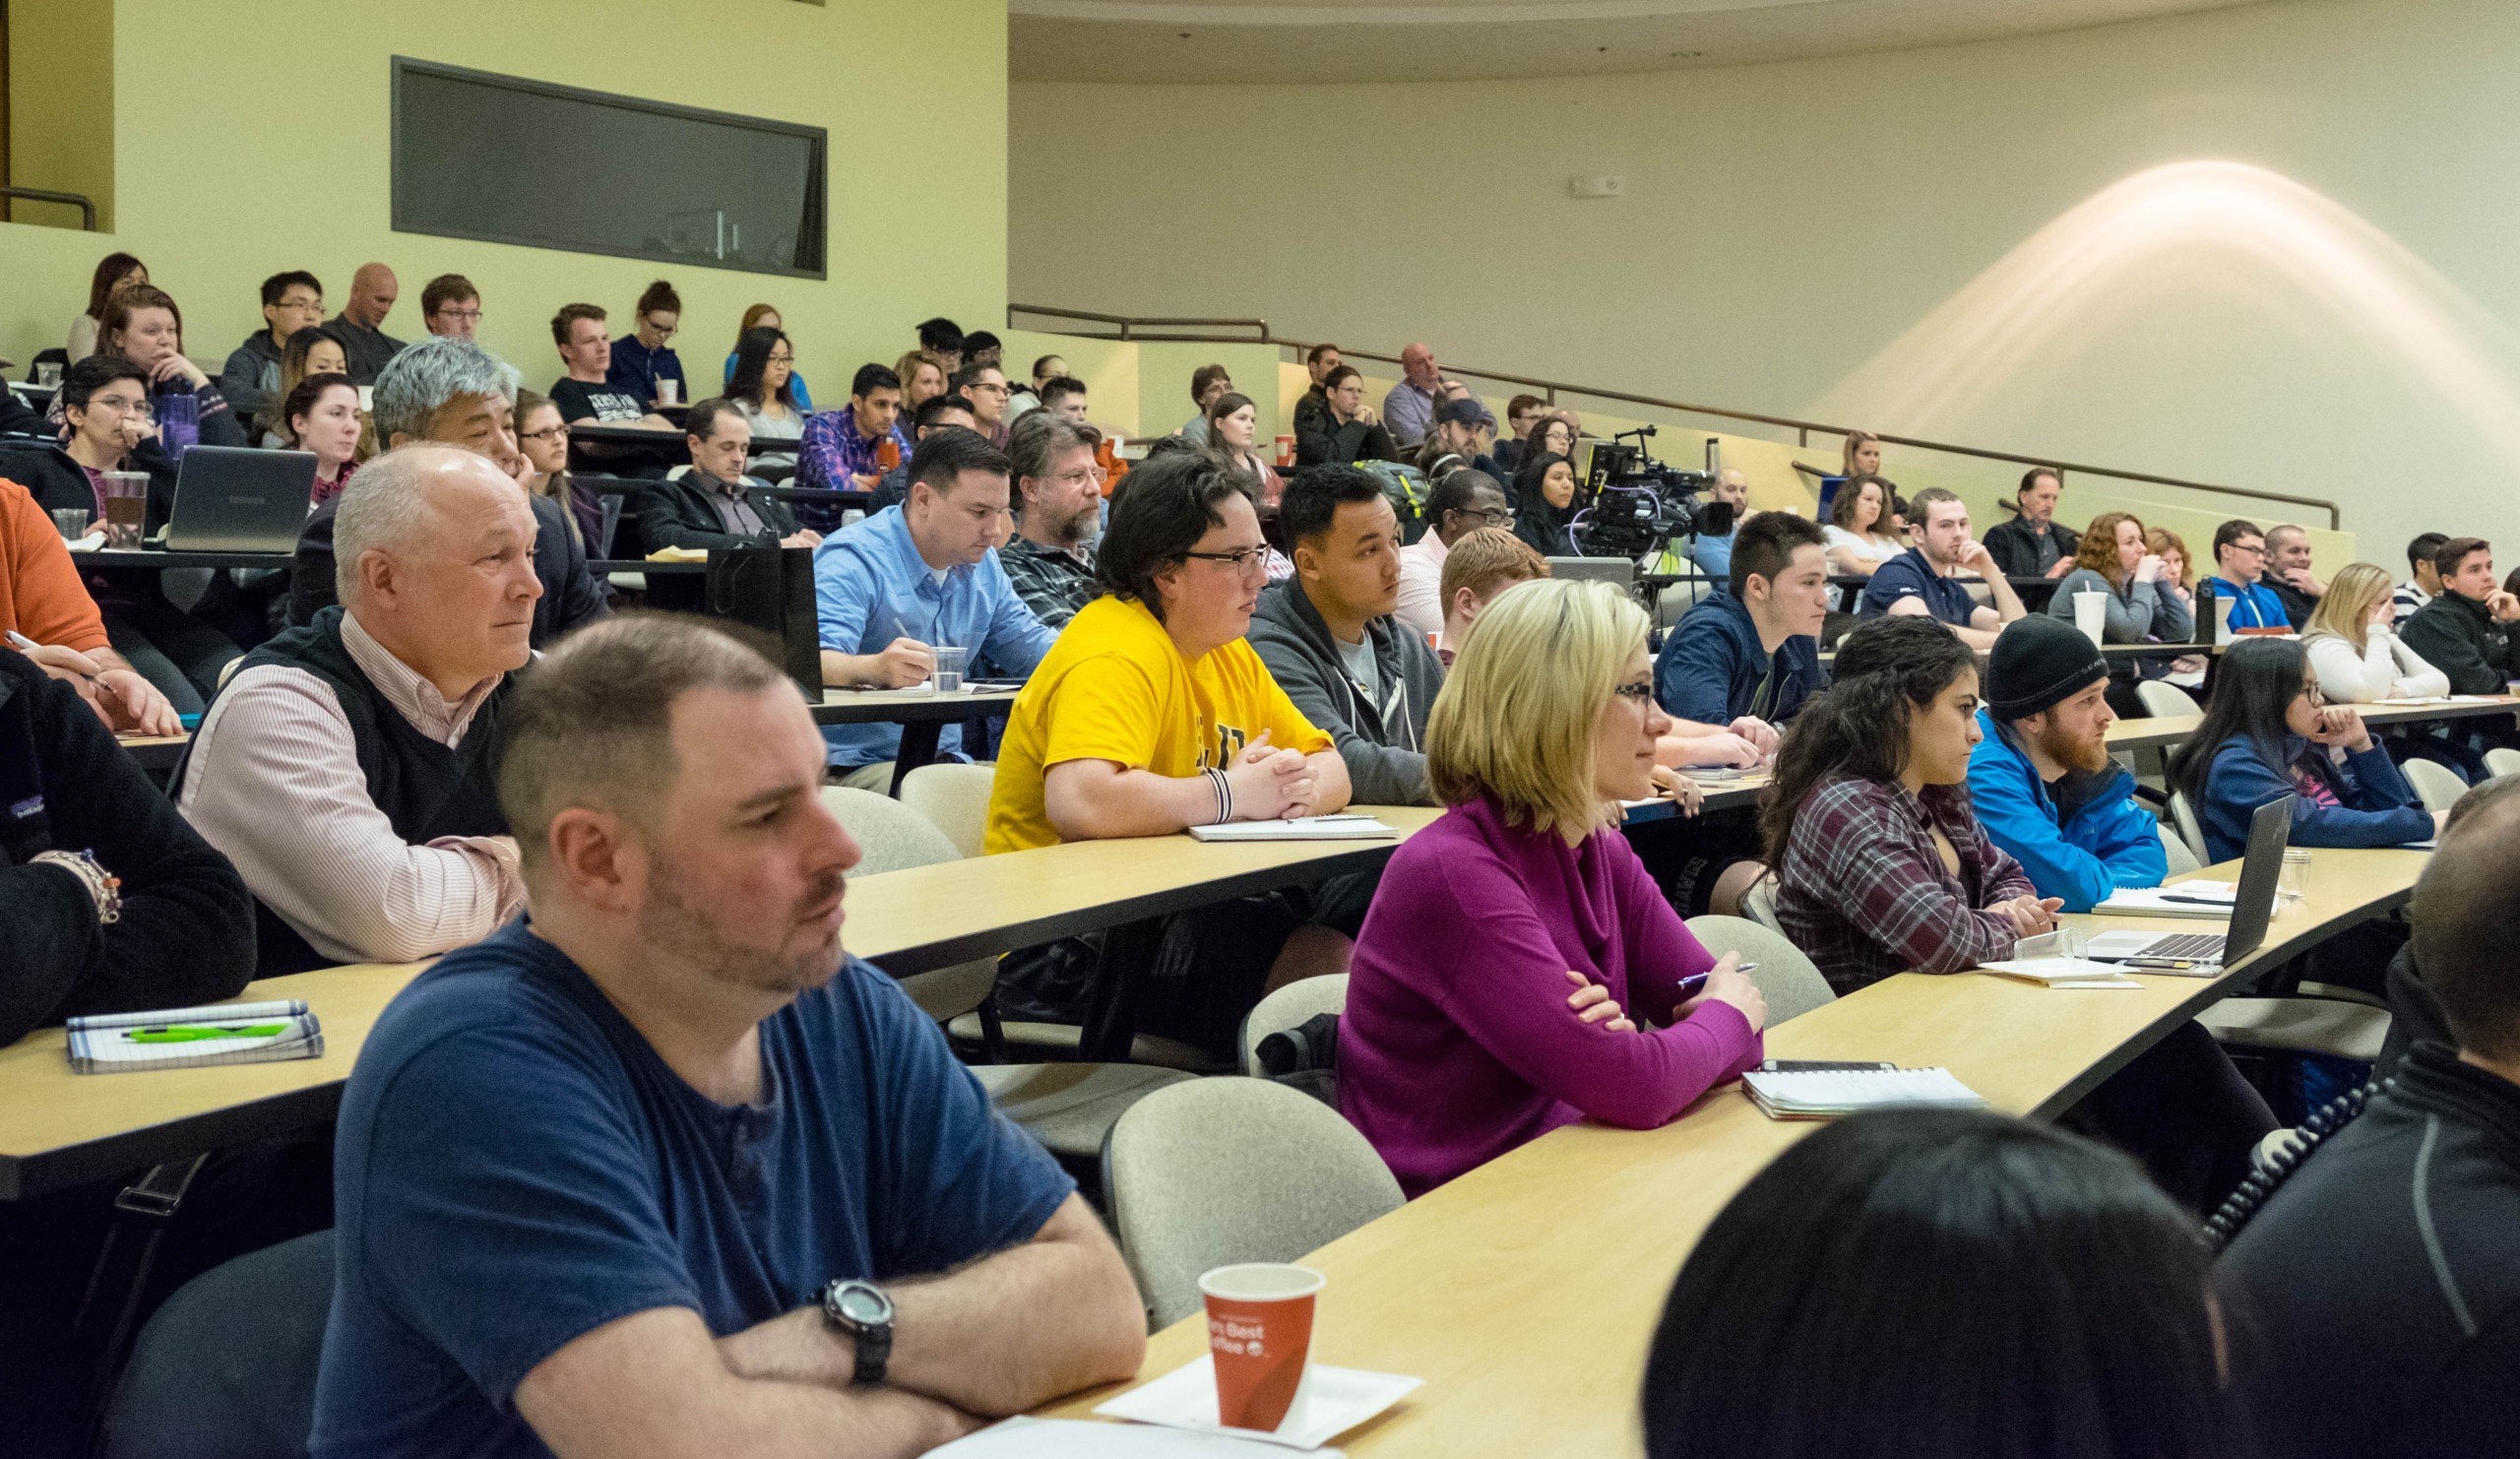 Audience listening to Nick Sears '87, '95, co-founder of Android, speaking as part of the Executive Leadership Series at PLU, on Monday, Feb. 22, 2016. (Photo: John Froschauer/PLU)